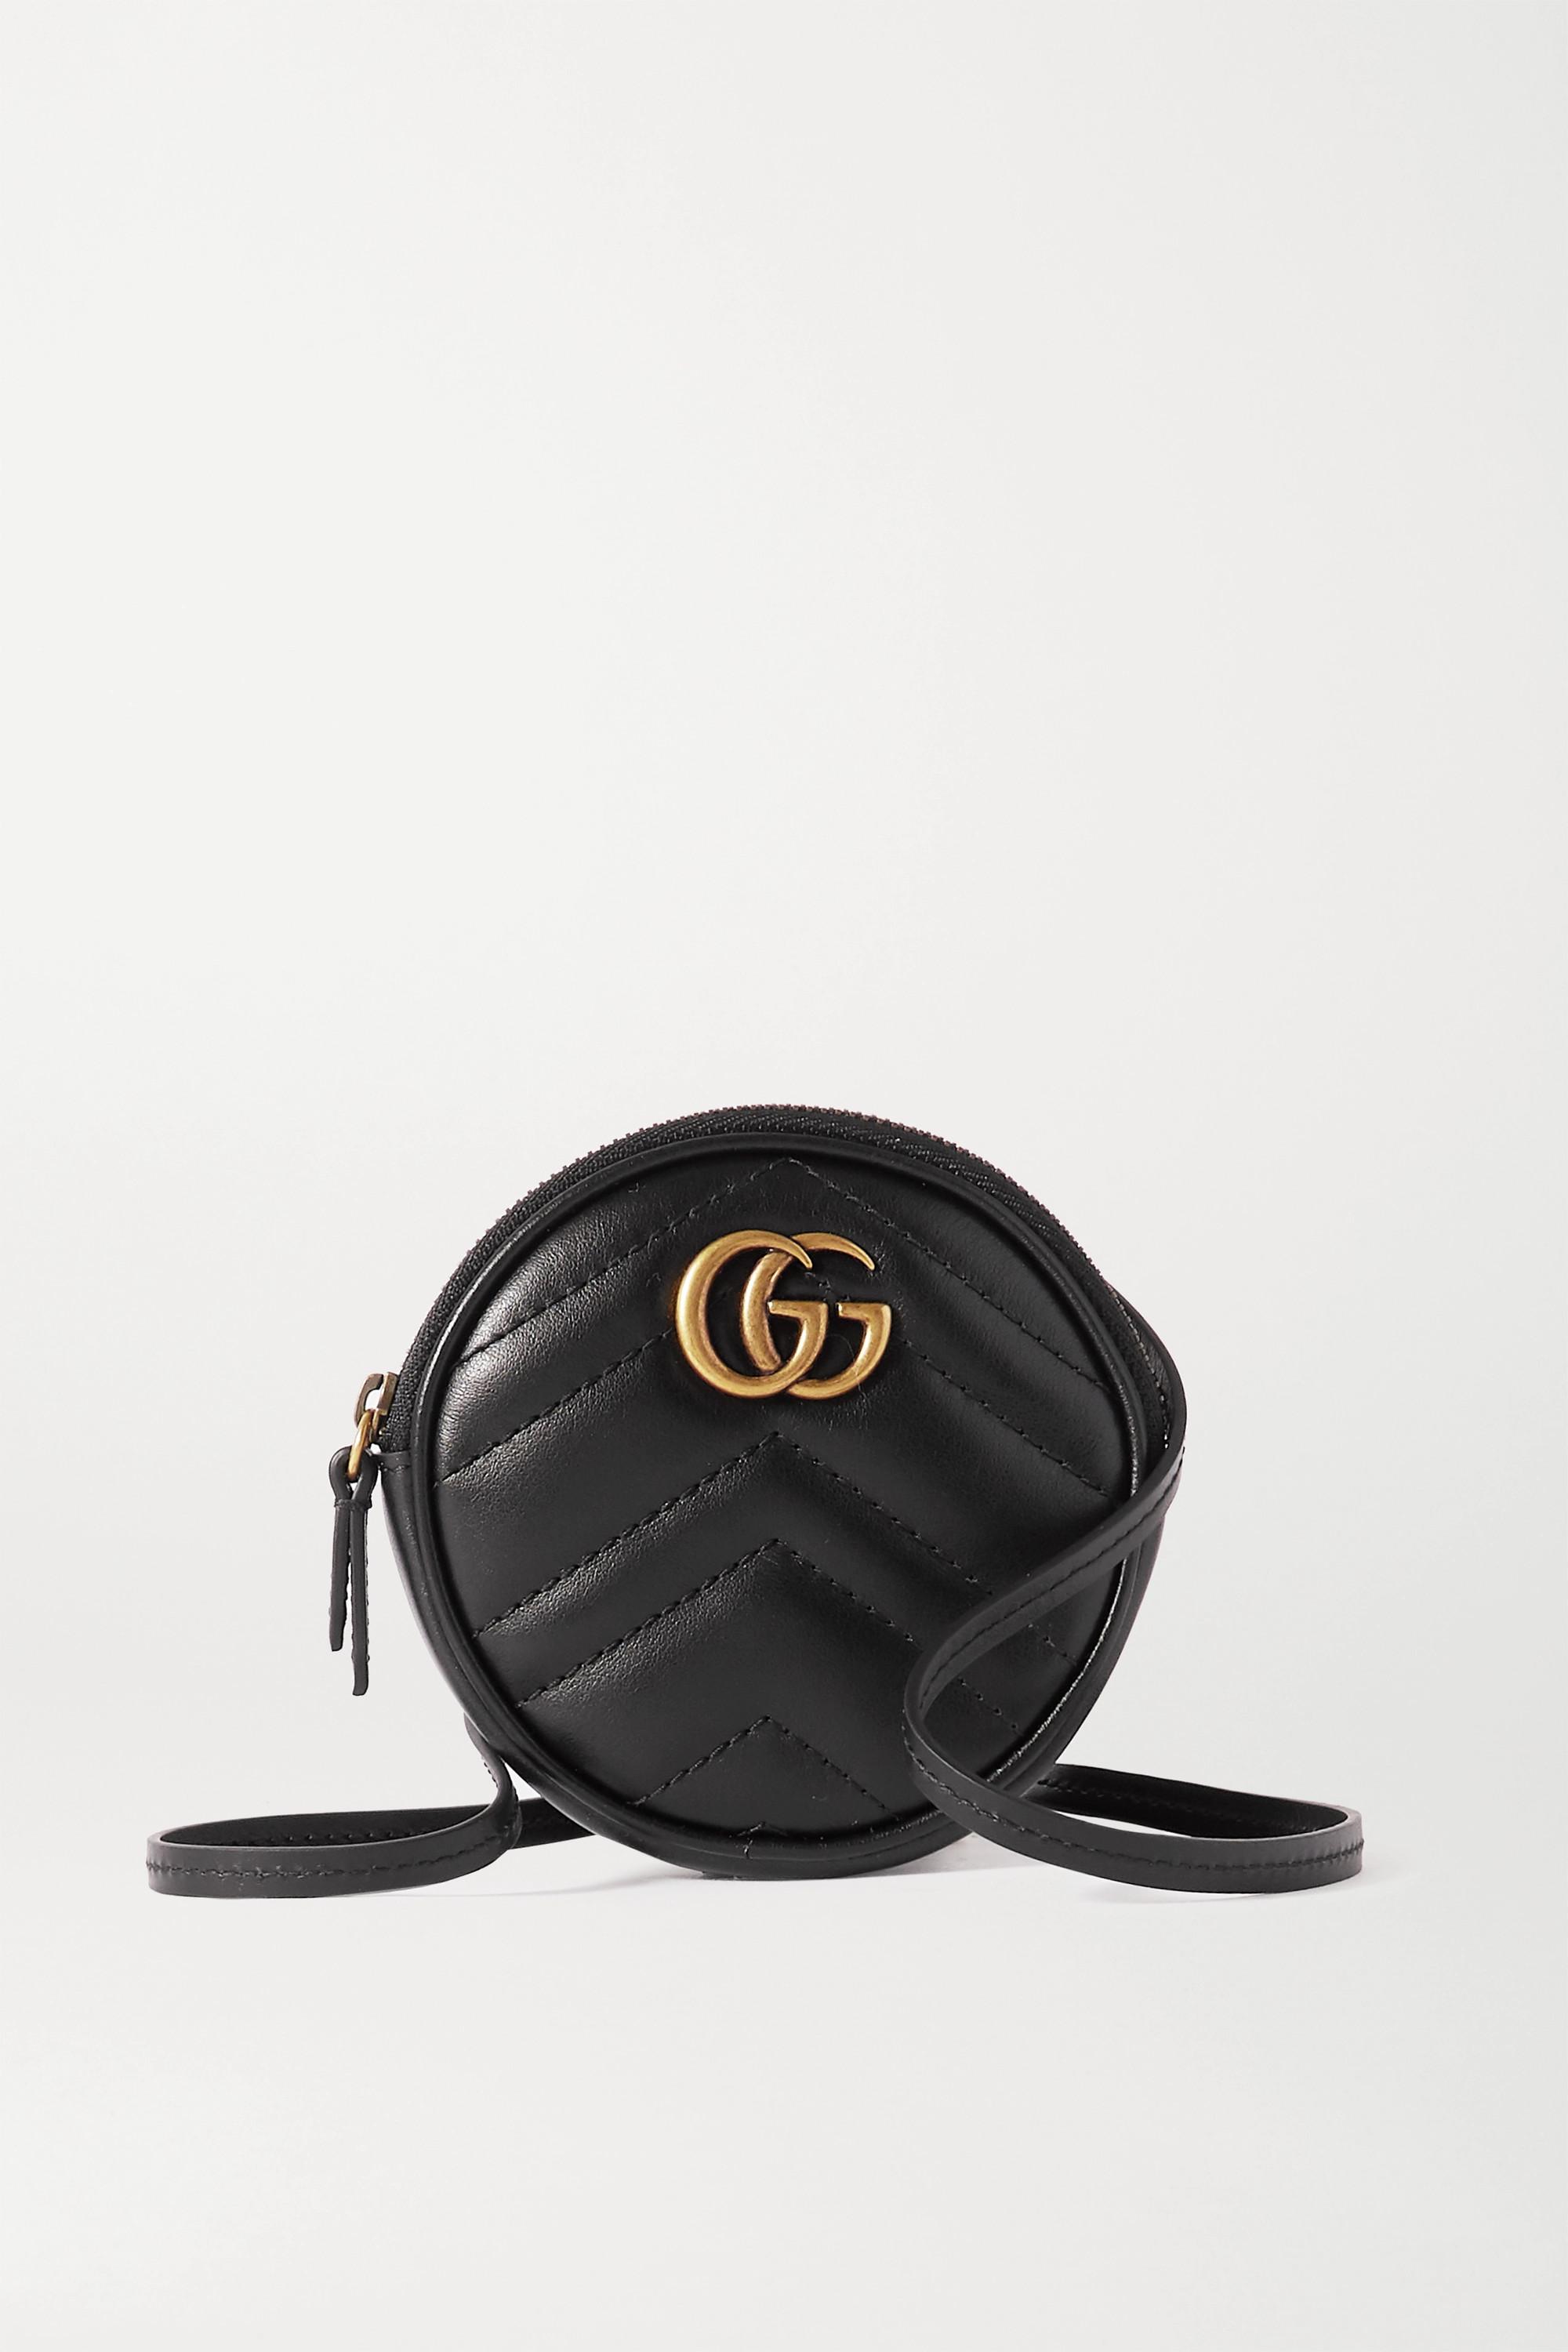 Gg marmont flap leather crossbody bag Gucci Black in Leather - 27308707